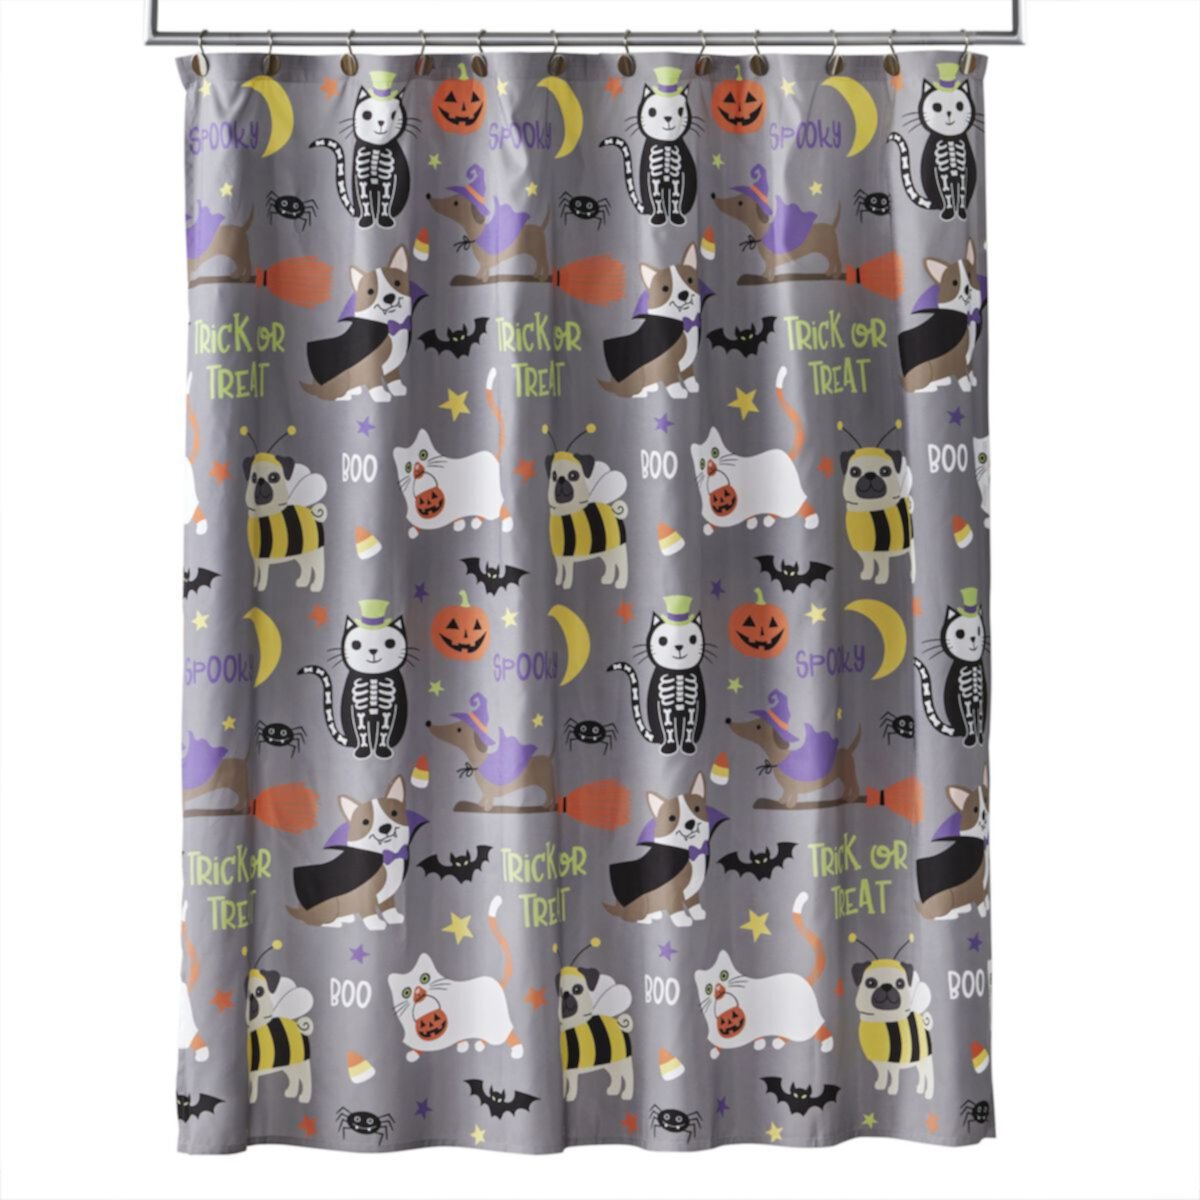 SKL Home Trick or Treat Pets Fabric Shower Curtain SKL Home